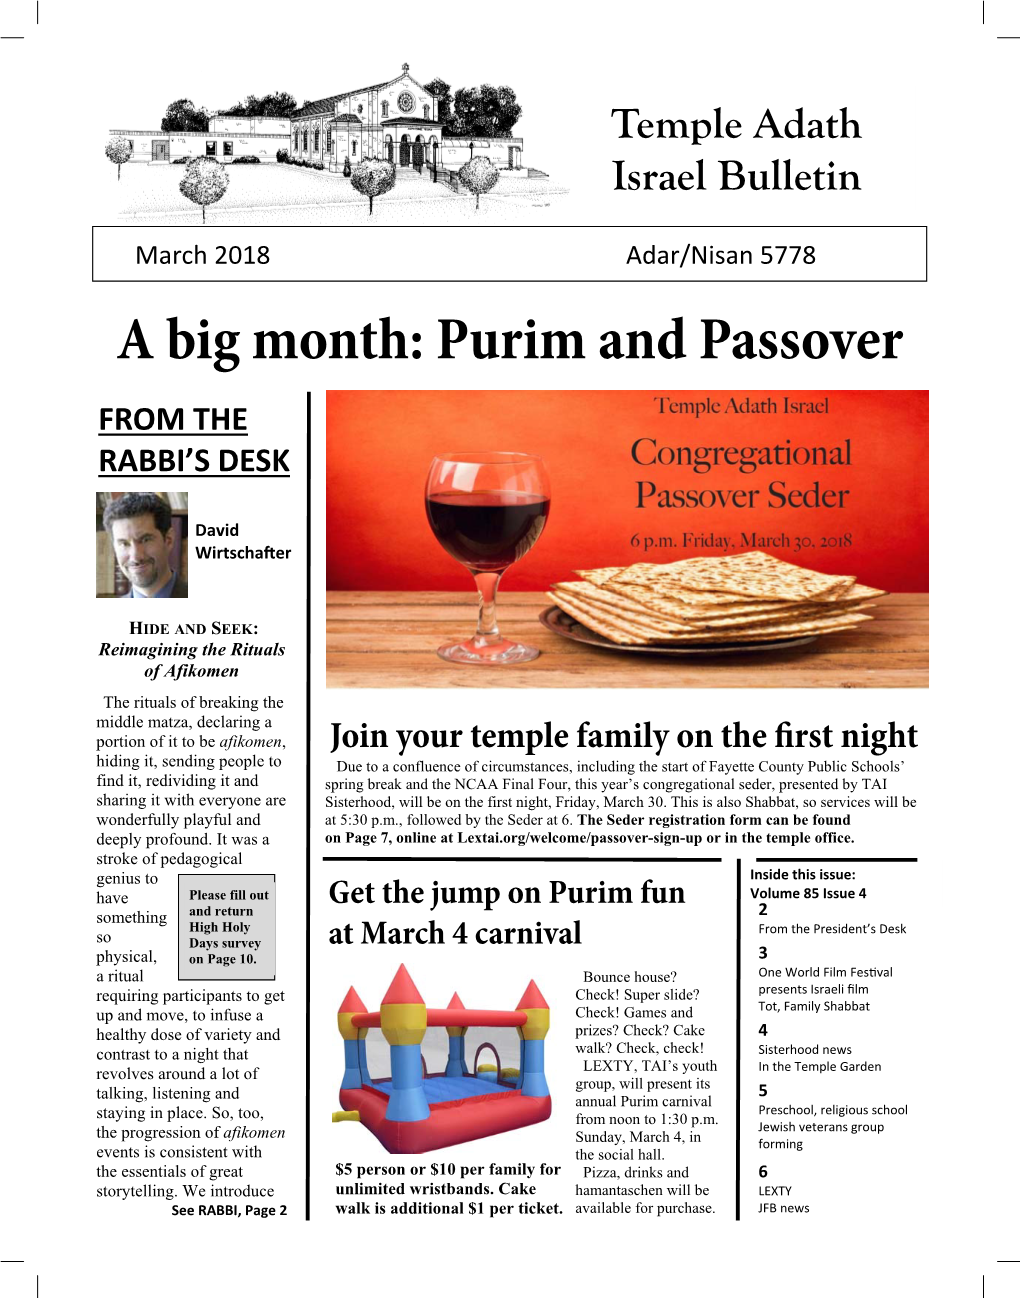 March 2018 Adar/Nisan 5778 a Big Month: Purim and Passover from the RABBI’S DESK